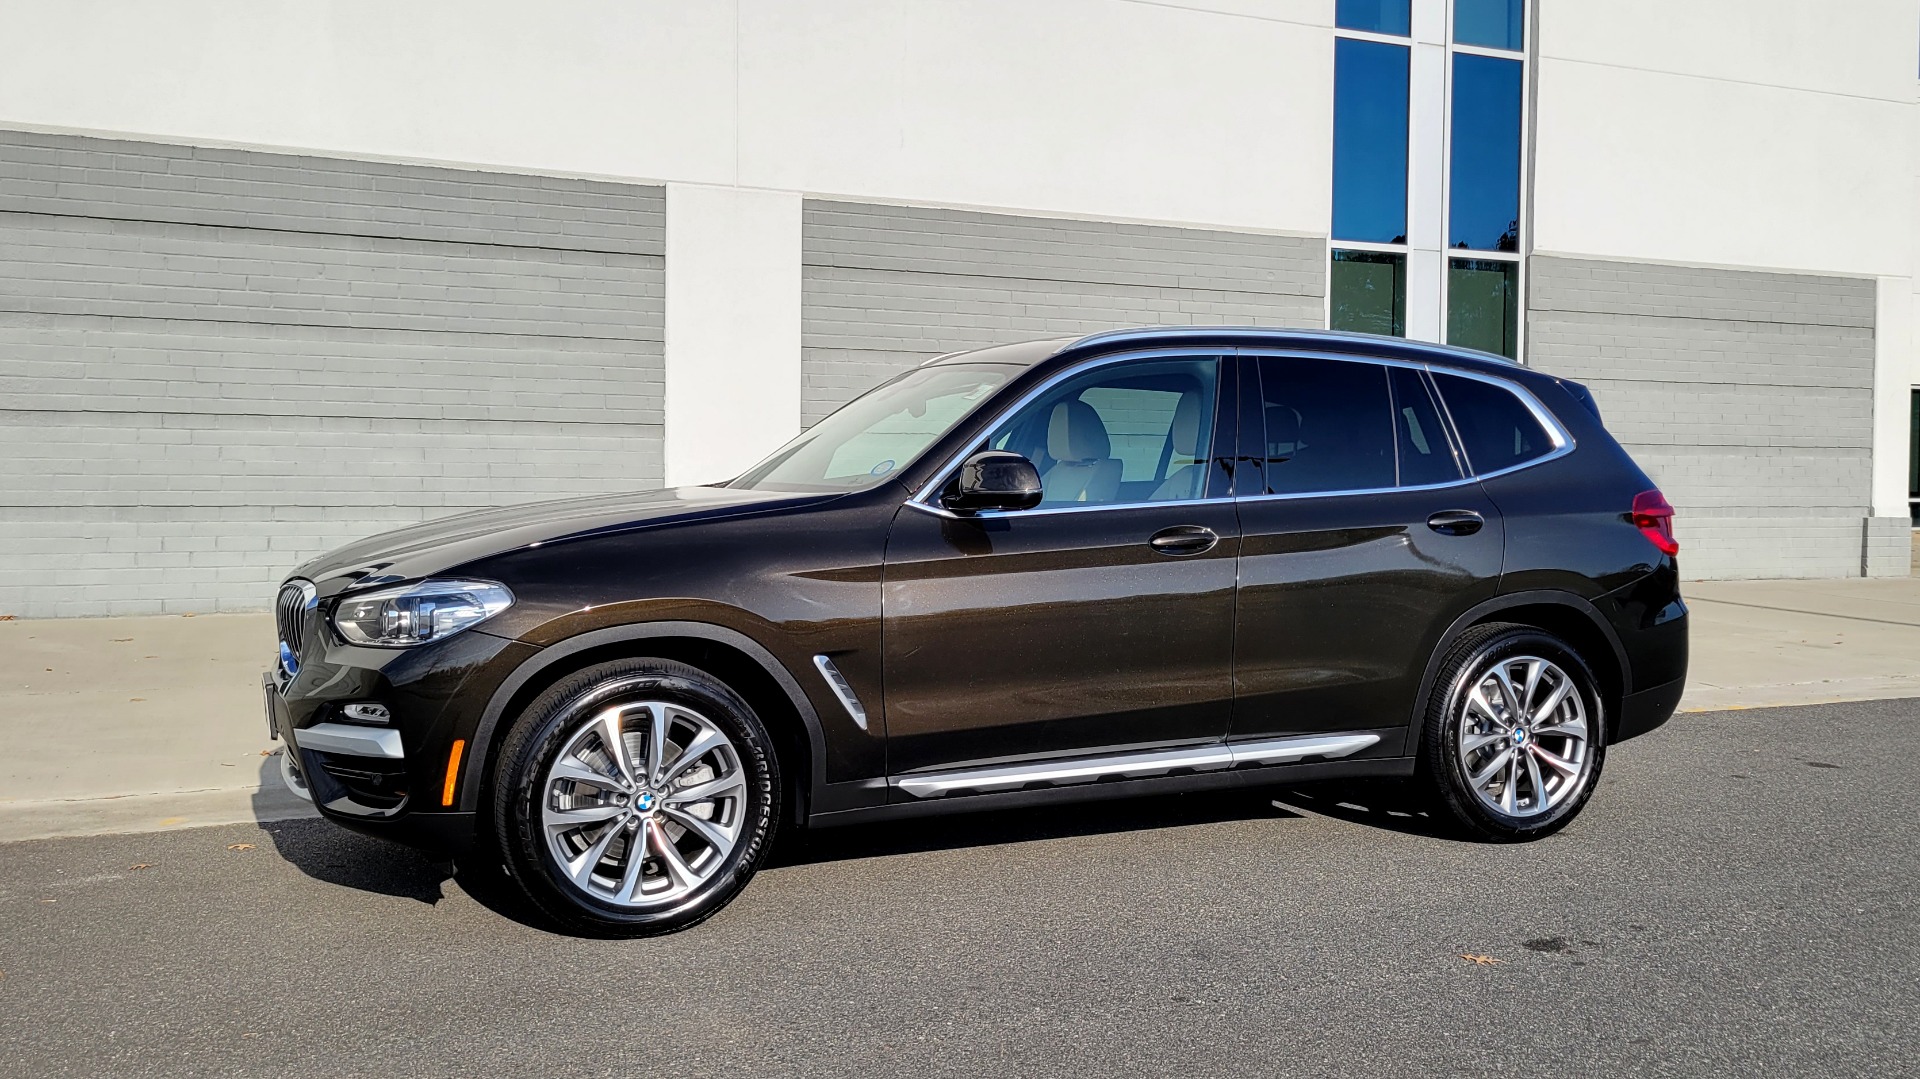 Used 2019 BMW X3 XDRIVE30I 2.0L SUV / NAV / PANO-ROOF / DRVR ASST / HTD STS / REARVIEW for sale Sold at Formula Imports in Charlotte NC 28227 3